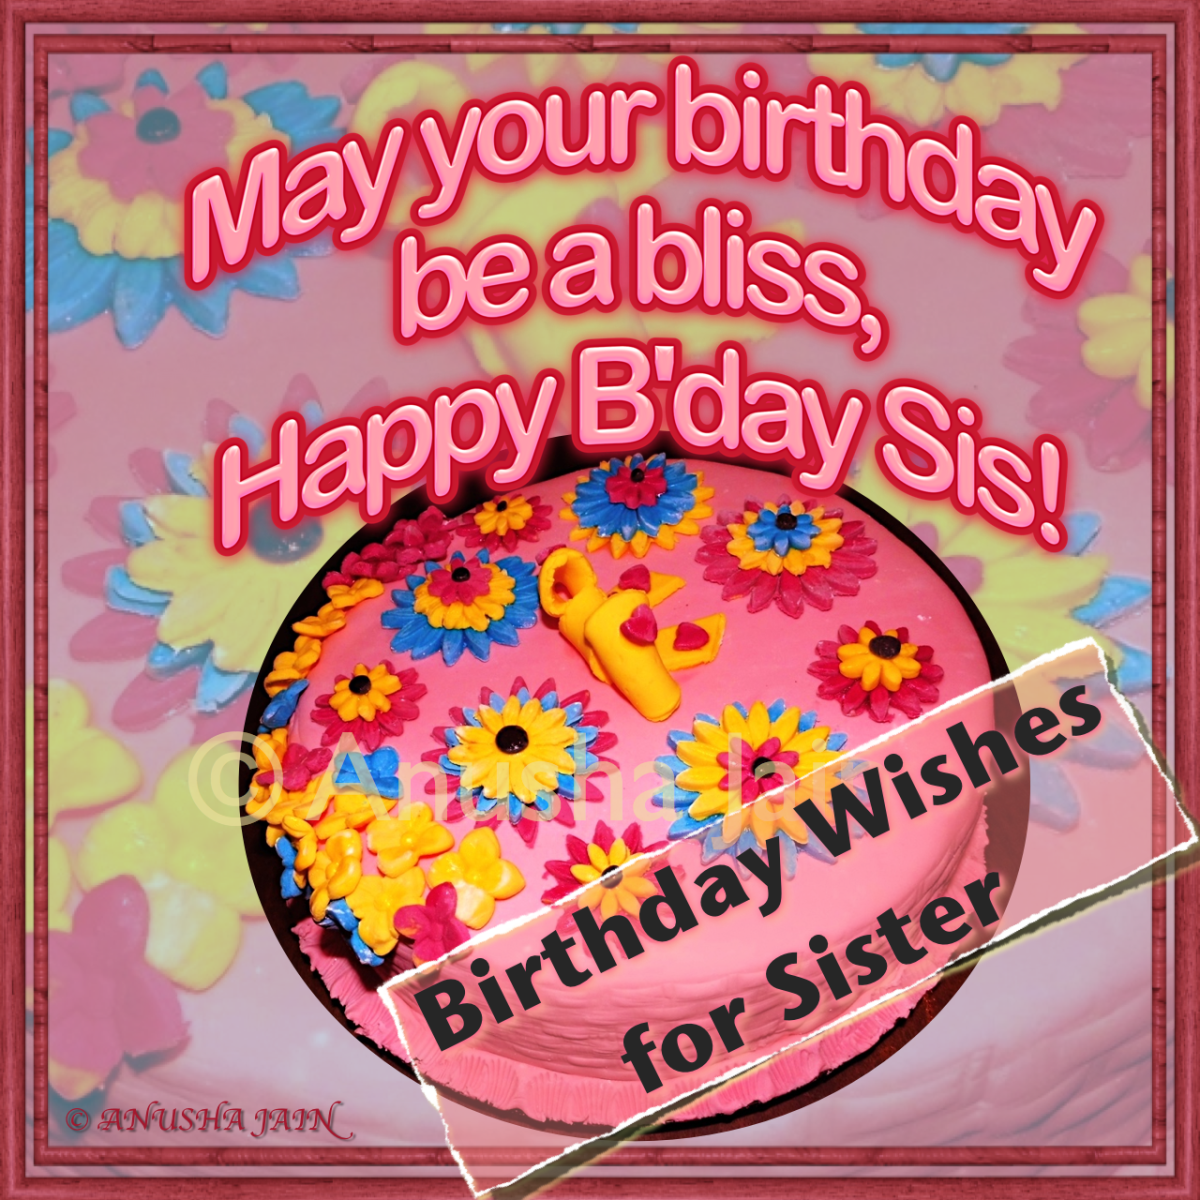 Birthday Wishes, Texts and Quotes for Sisters - Funny & Teasing, Heartfelt & Sincere